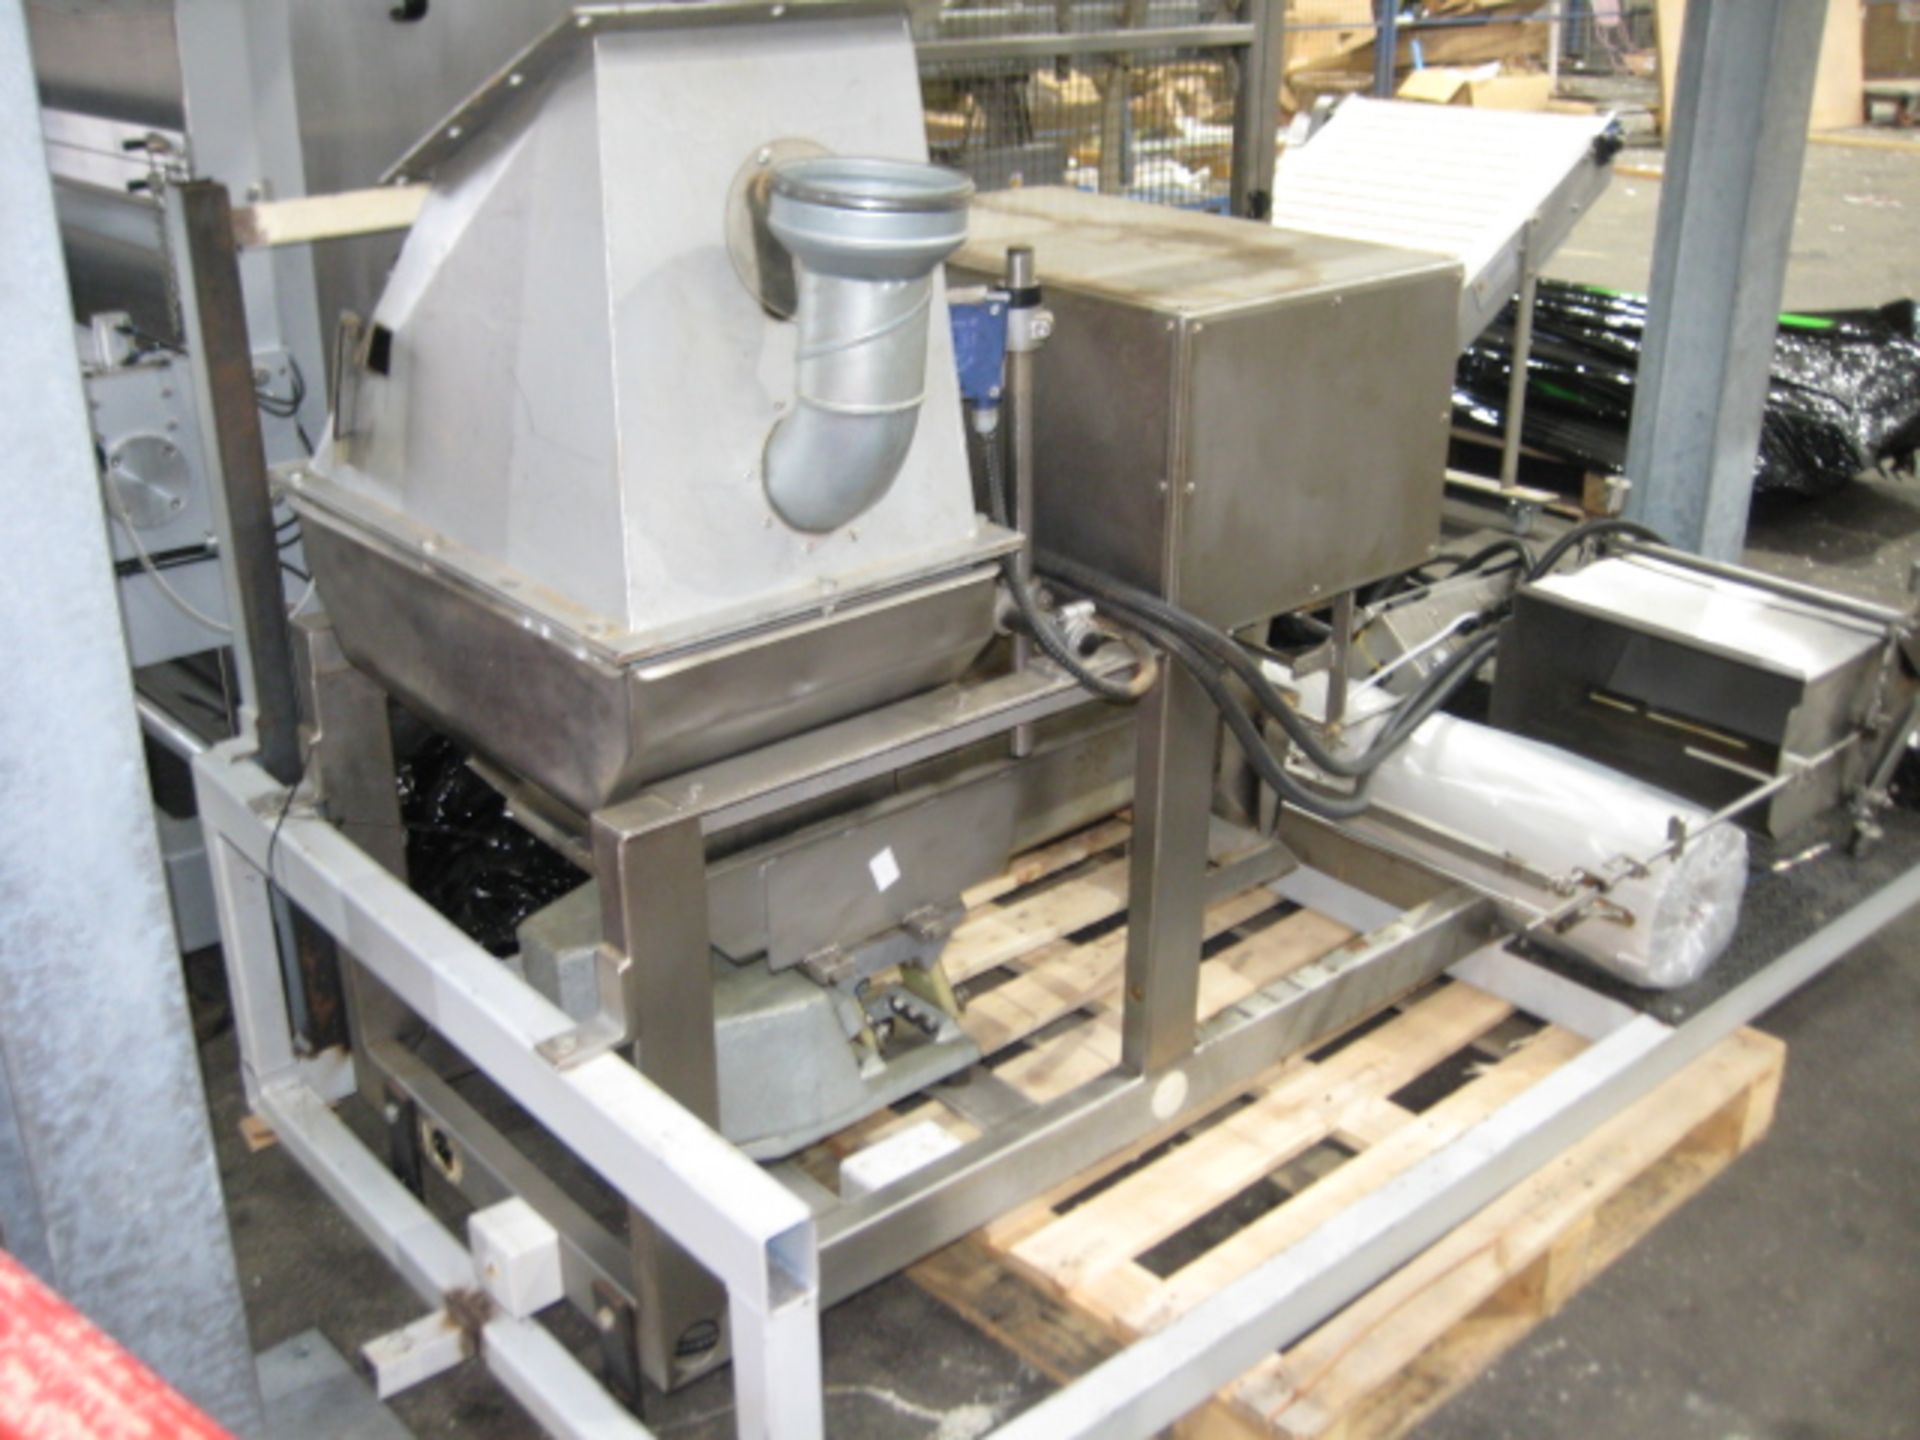 Weigher - Ward Bekker Digiway single channel linear weigher in stainless steel with control box.